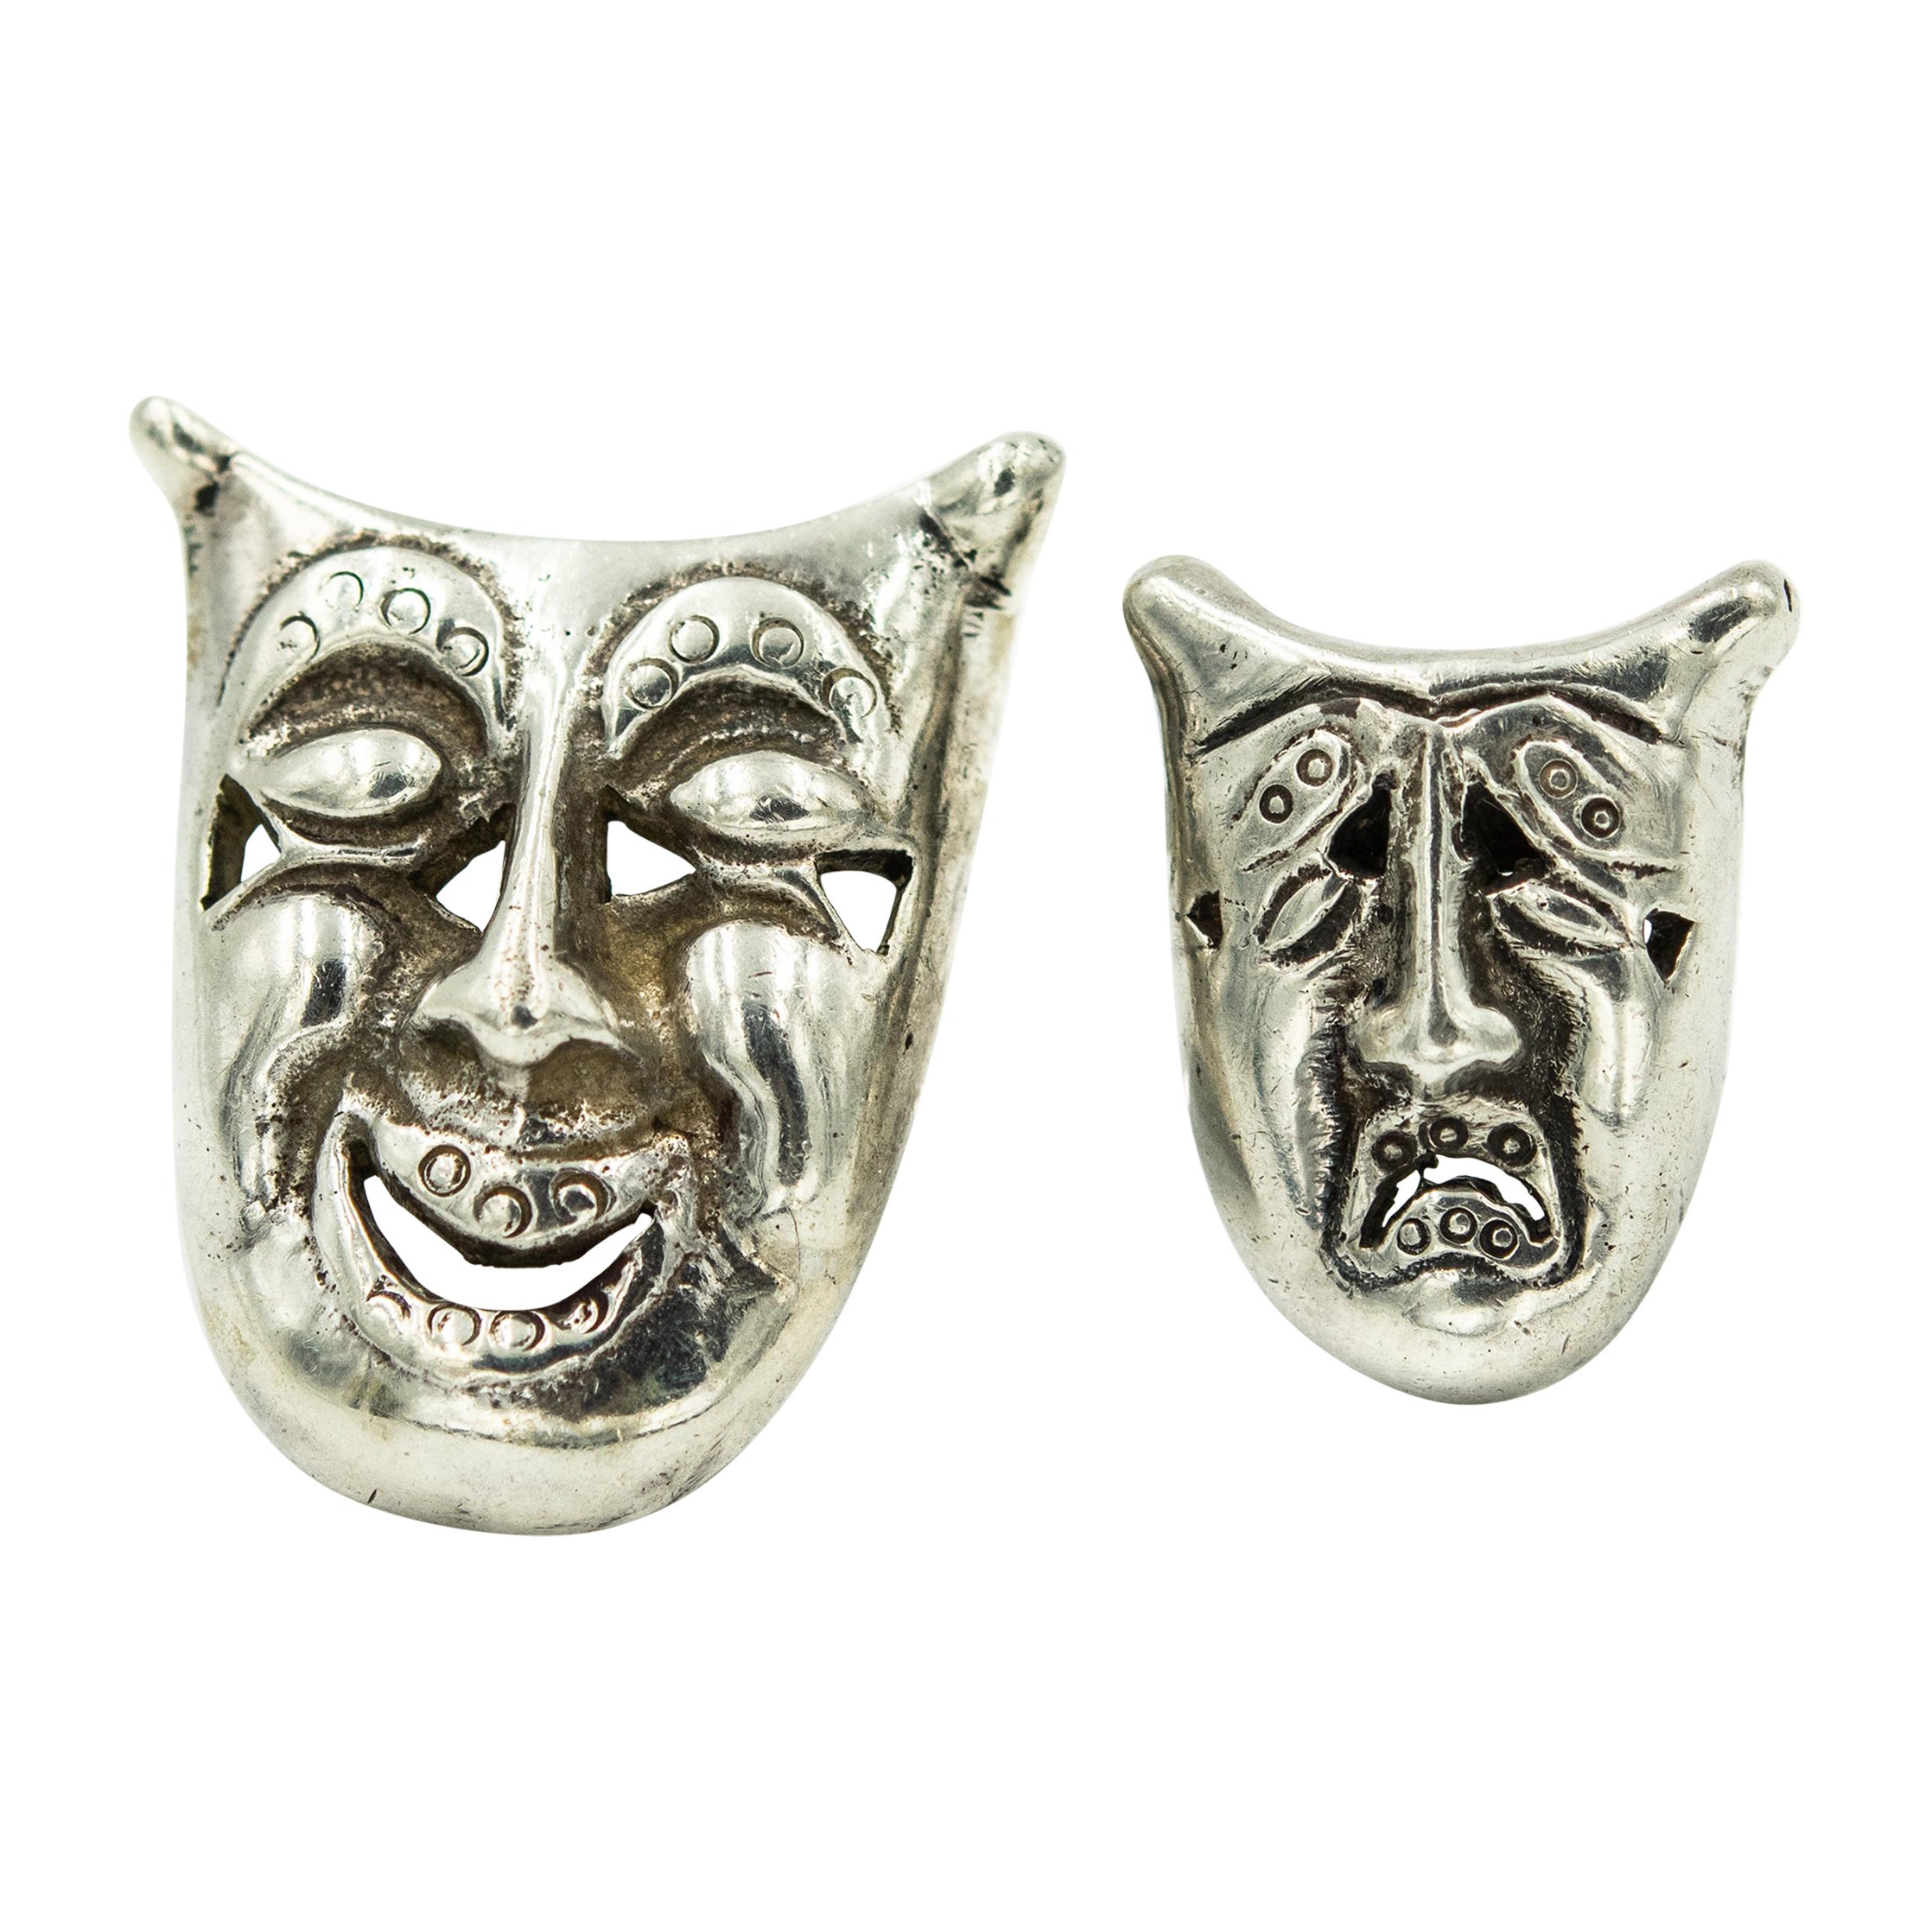 Comedy And Tragedy Face Sterling Silver Brooches Pair